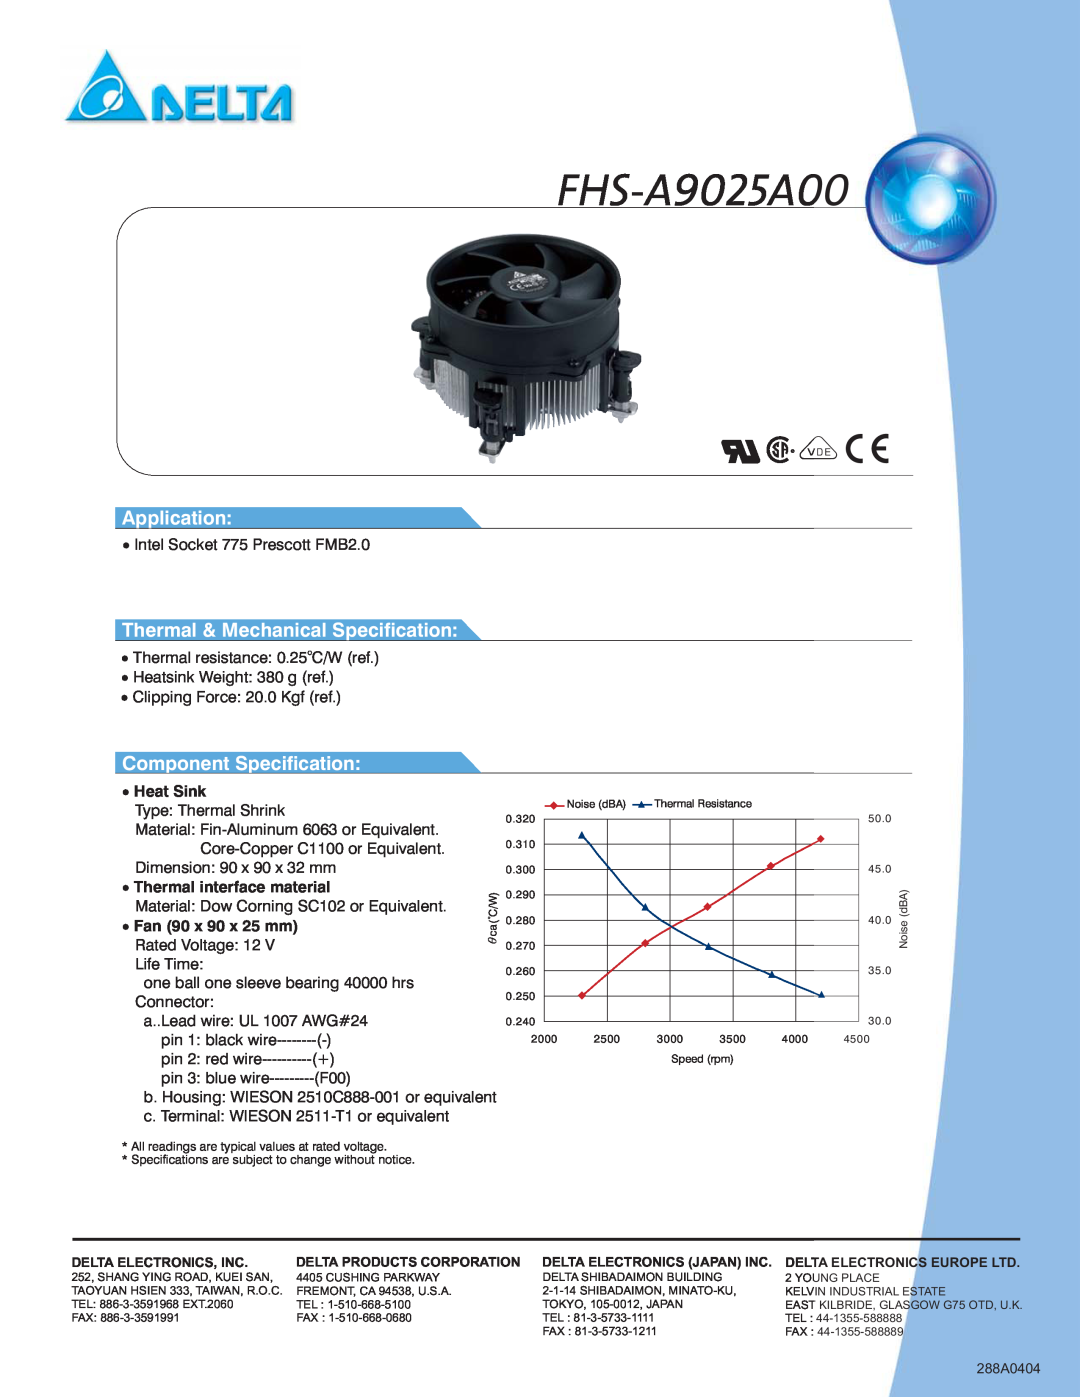 Delta Electronics FHS-A7015A40 FHS-A9025A00, Fan 90 x 90 x 25 mm, Application, Thermal & Mechanical Specification 